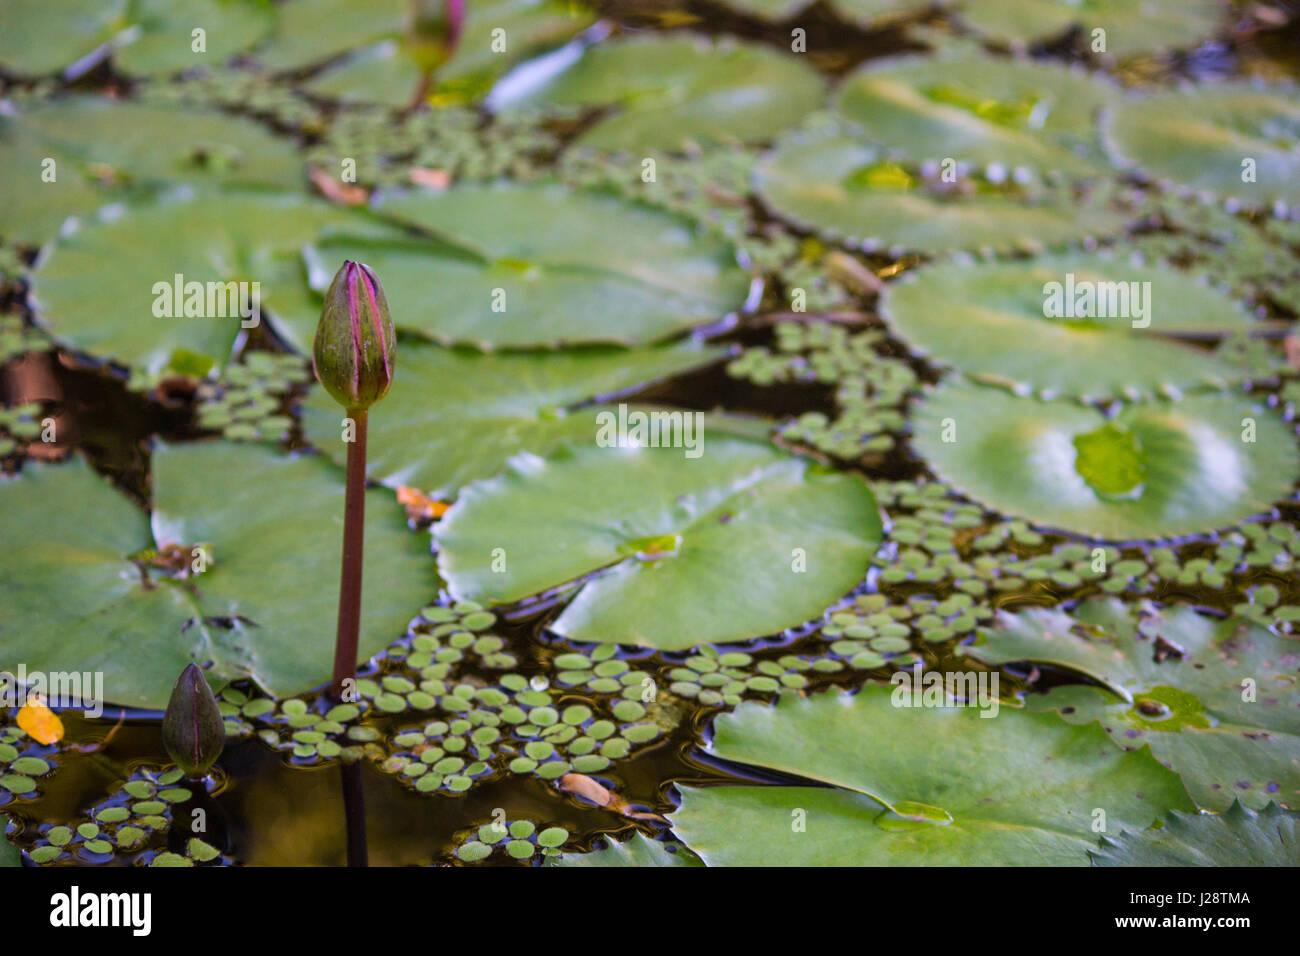 Duckweed and Waterlilies with a flower bud Stock Photo